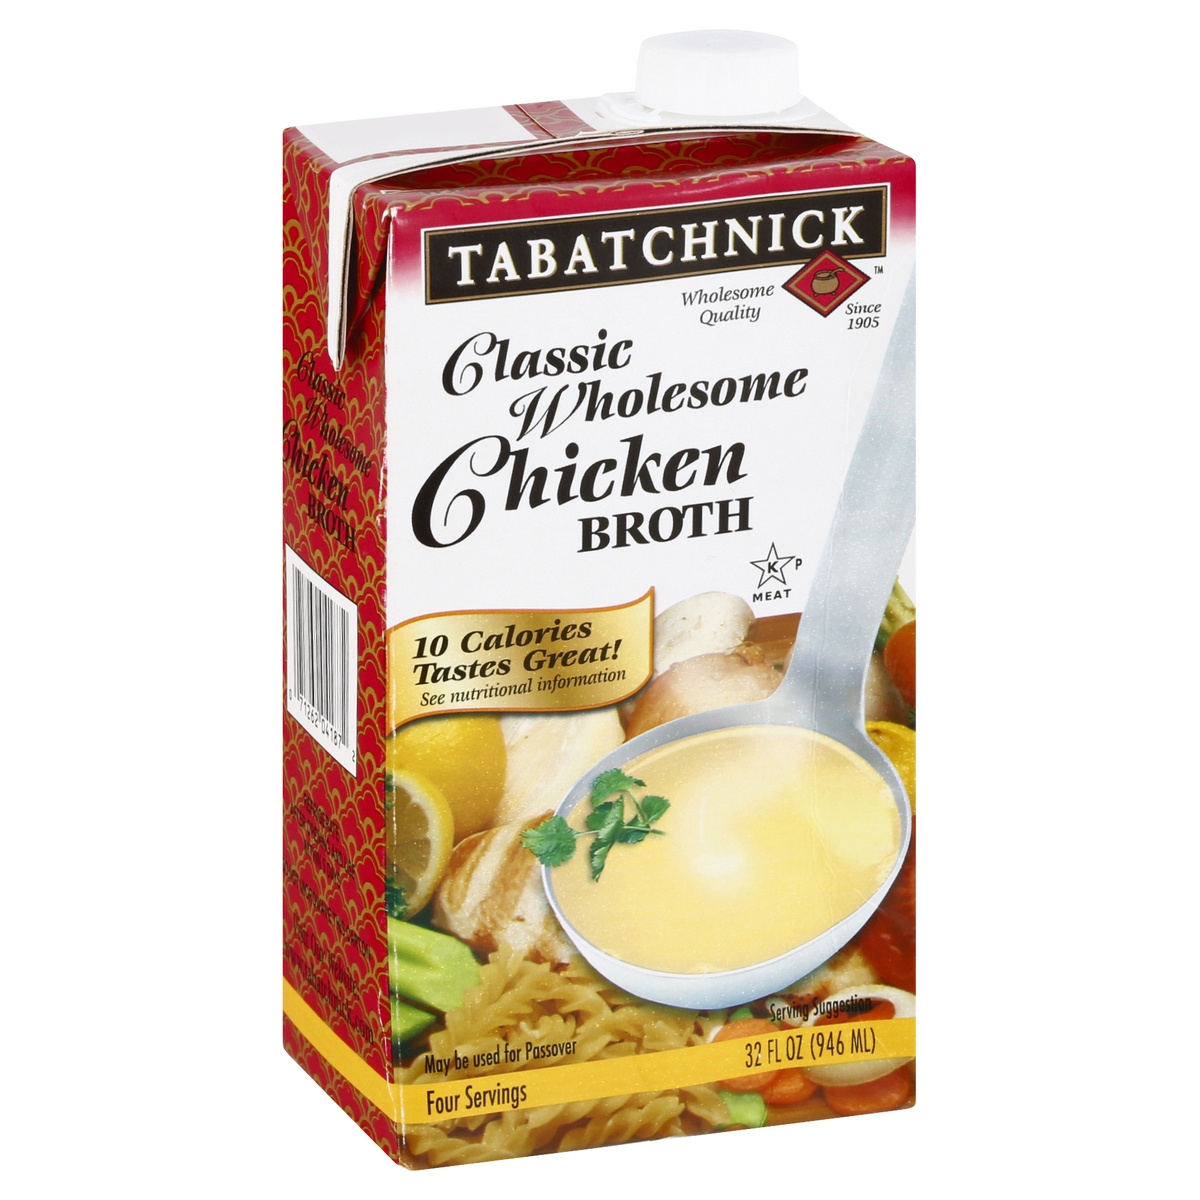 slide 11 of 11, Tabatchnick Classic Wholesome Chicken Broth, 32 fl oz